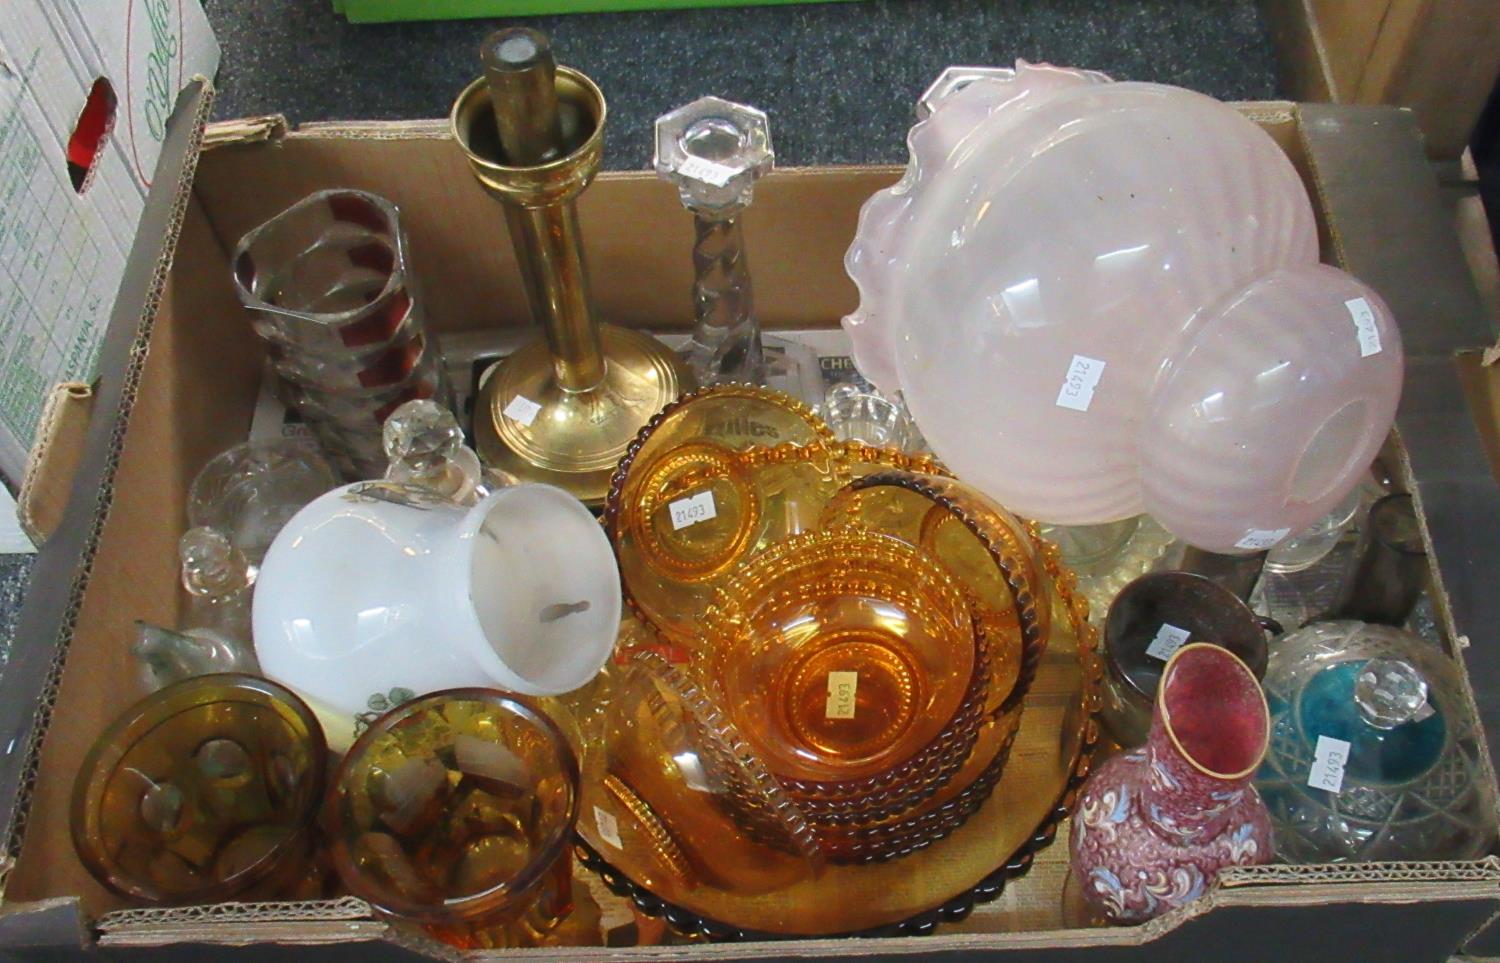 Box of assorted glass to include: selection of yellow glass bowls, plates and vases. Translucent